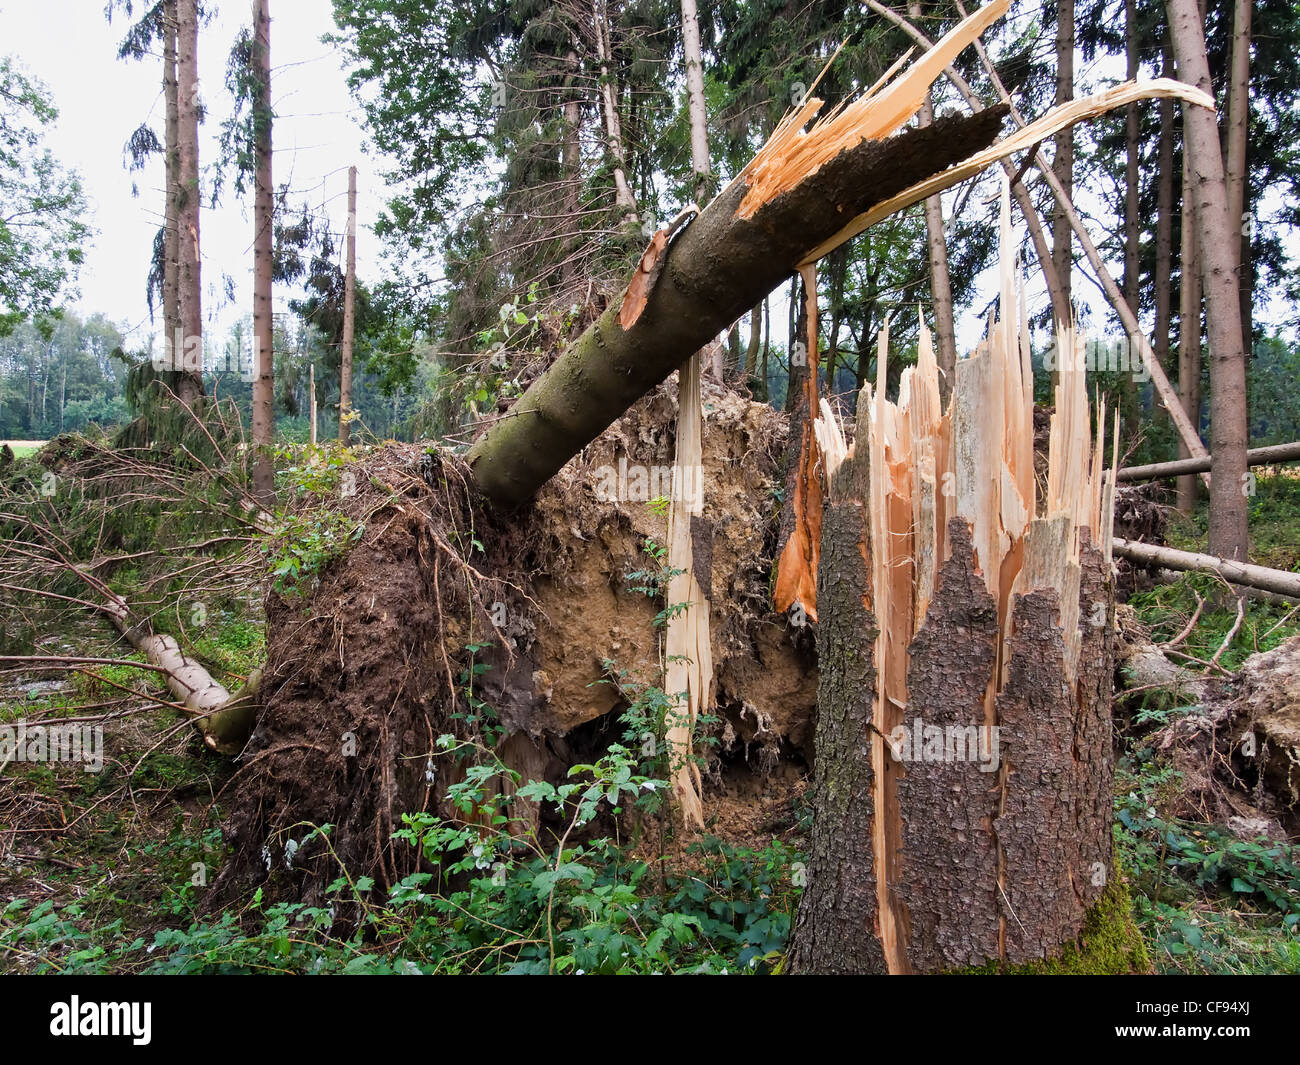 storm damage. fallen trees in the forest after a storm. Stock Photo